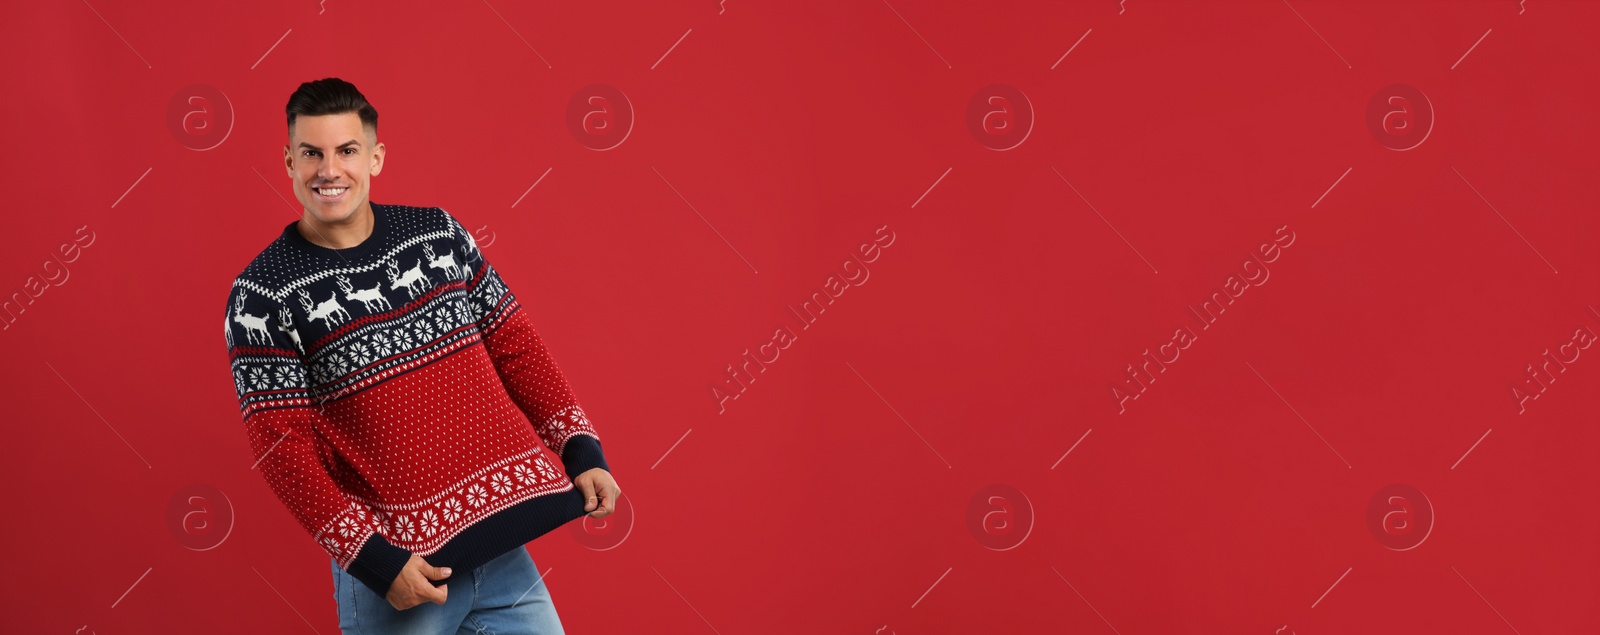 Photo of Happy man showing his Christmas sweater on red background